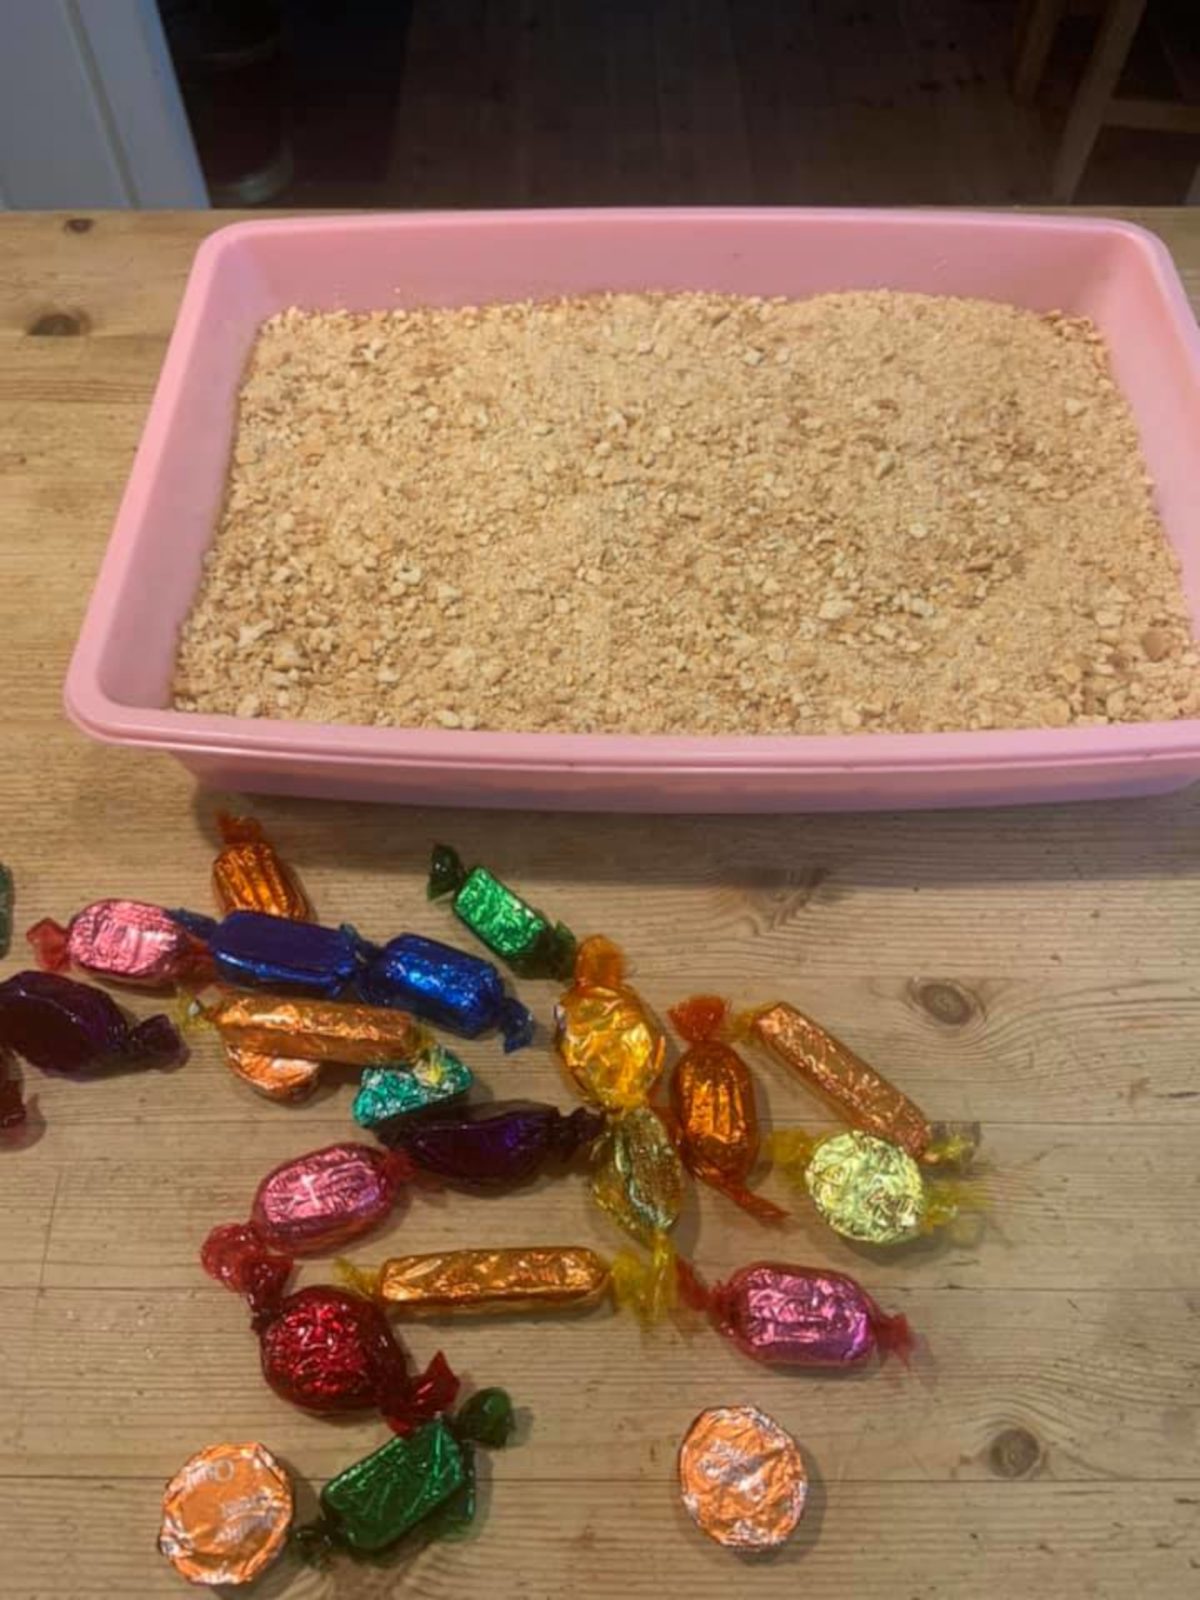 Cat litter cake before the finishing touches